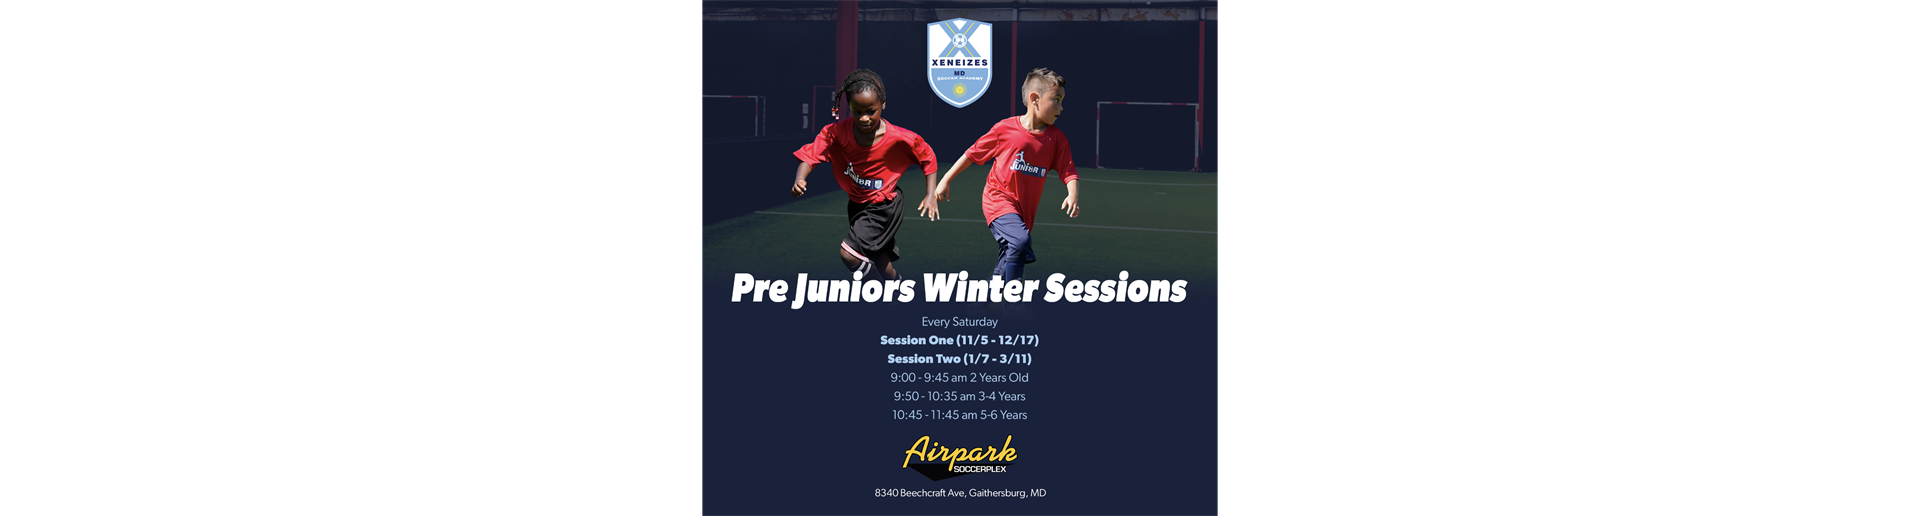 Pre Juniors Winter Sessions Now Open!